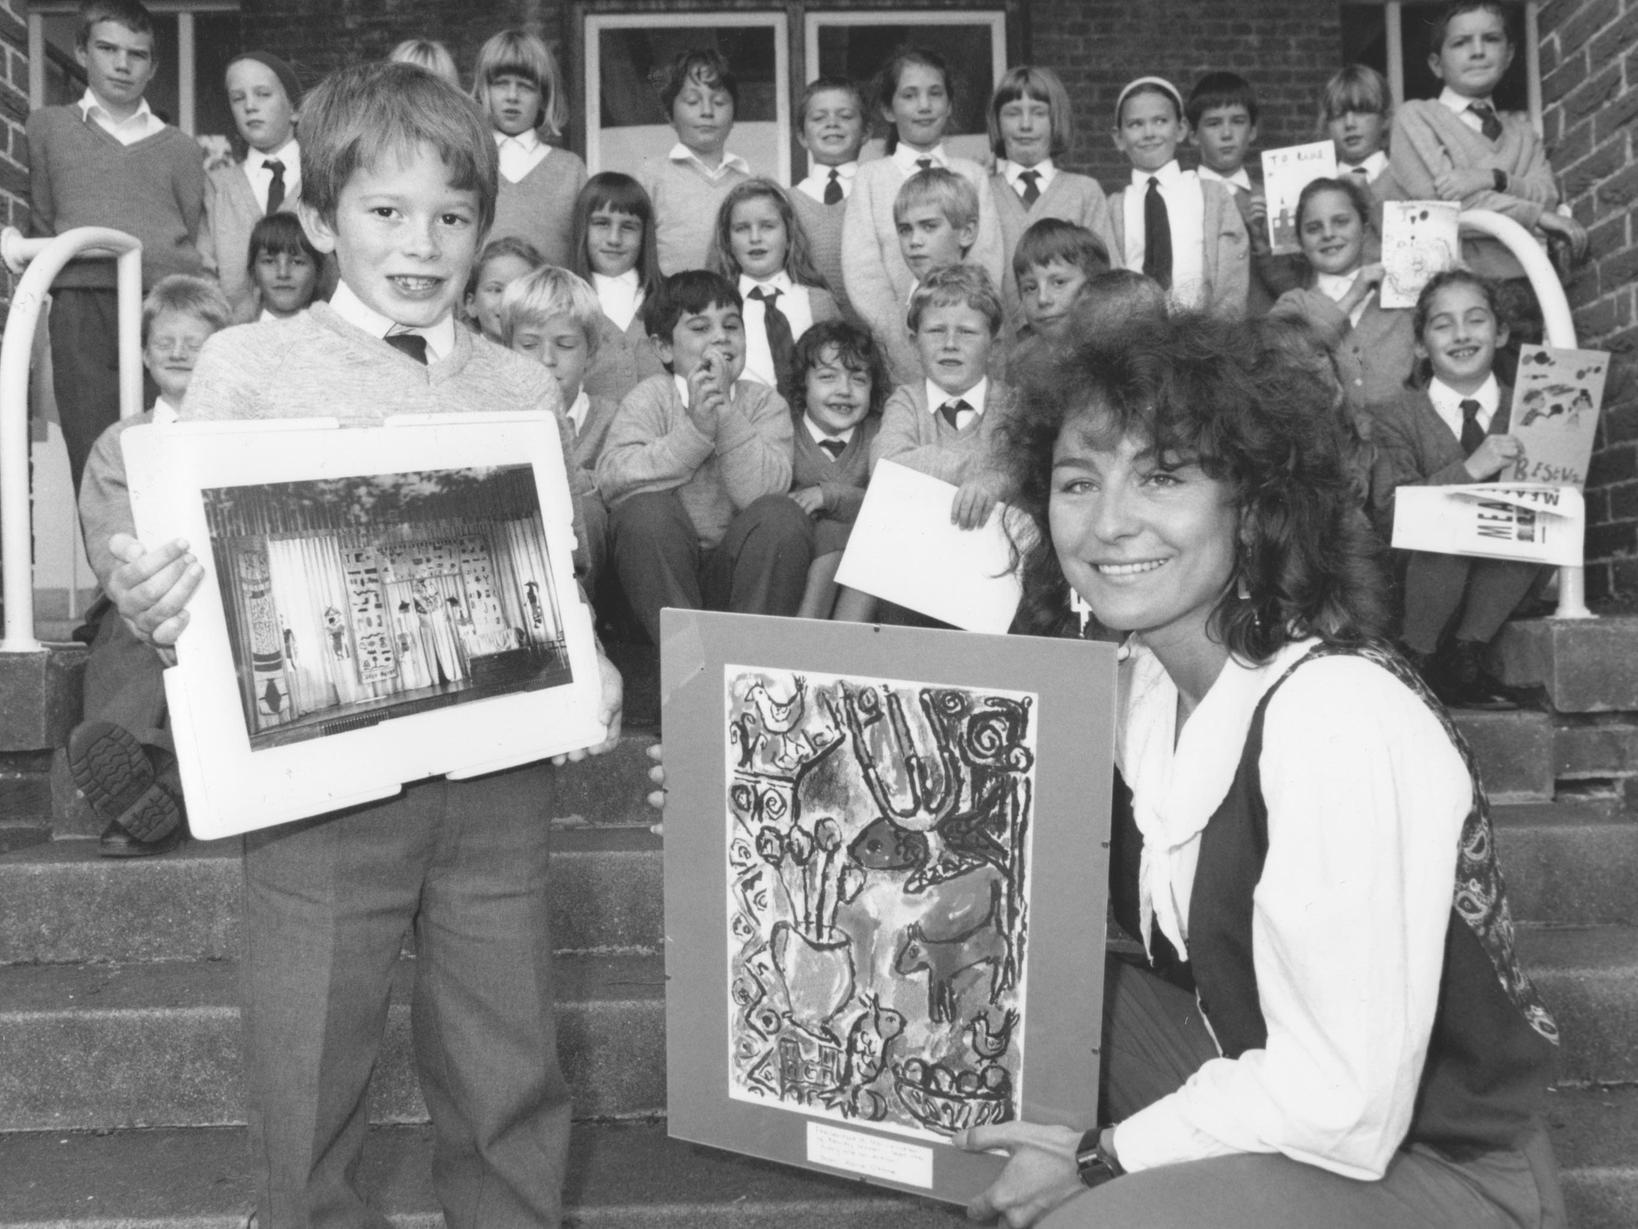 Artist in residence at Newby School Raine O'Hare presented one of her paintings to the children in September 1994, and in turn pupil James Murray presented Raine with a picture to mark her time at the school.